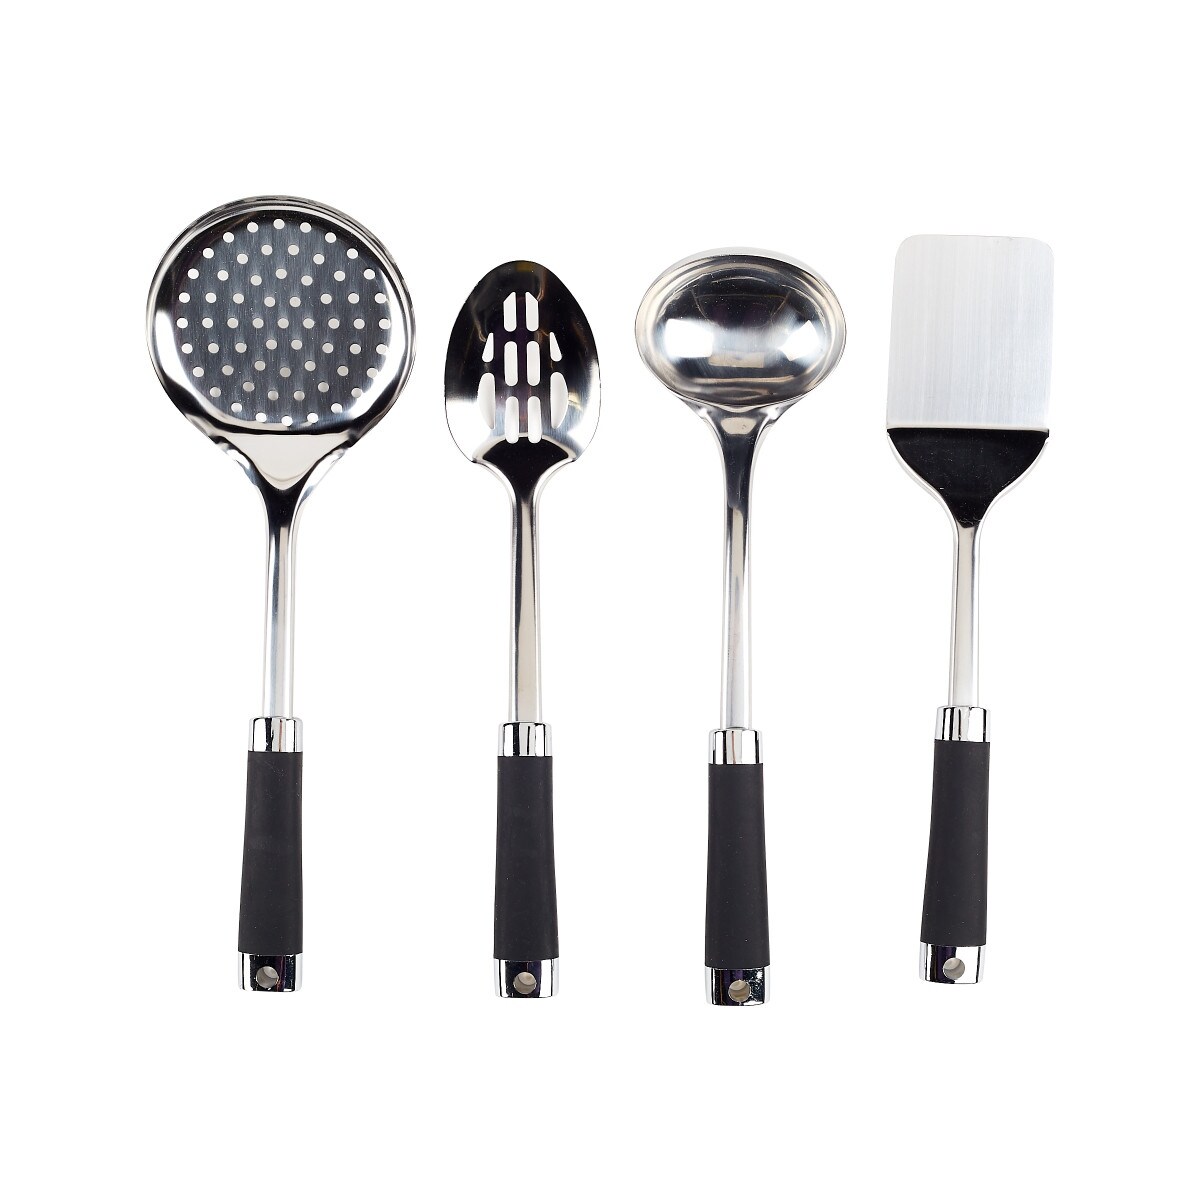 https://ak1.ostkcdn.com/images/products/is/images/direct/bc5ba2c65a88d18c4ec62d63c7ee244a288c603f/Chef-Delicious-Stainless-Steel-4-Piece-Utensil-Set---Skimmer---Slotted-Turner---Solid-Spoon---Ladle-%2820578-GB%29.jpg